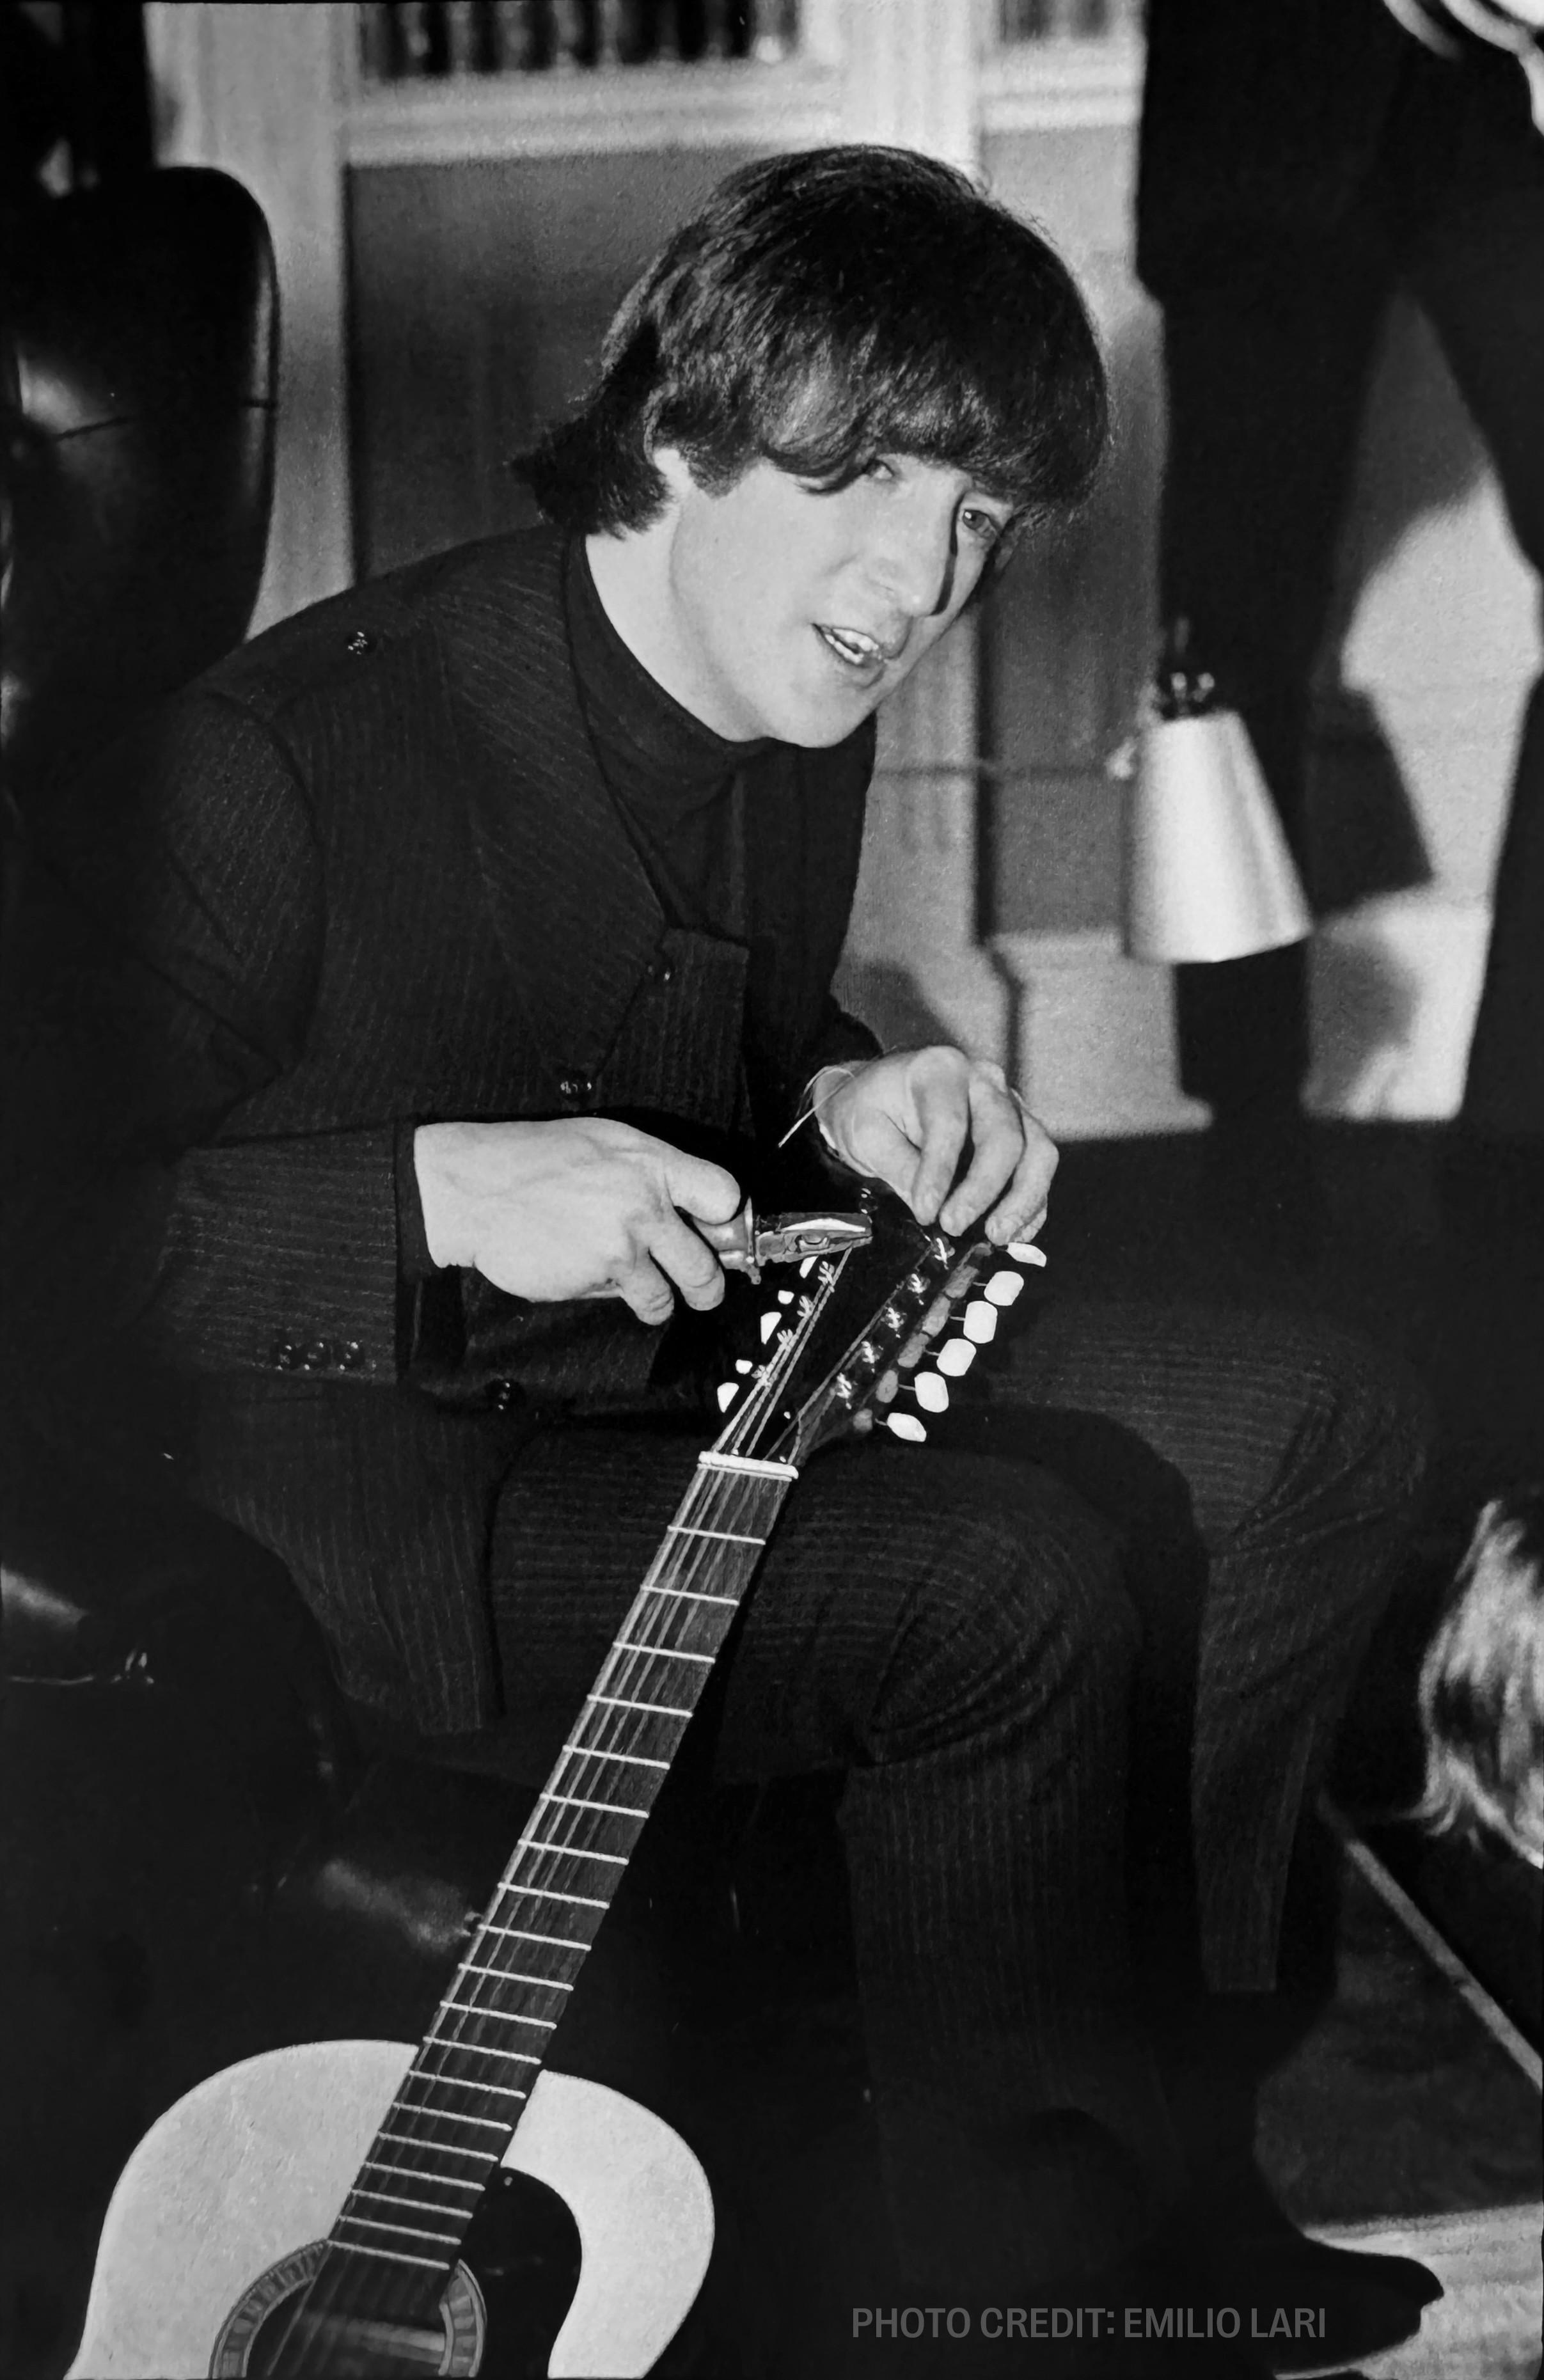 a black and white photo of a man playing a guitar